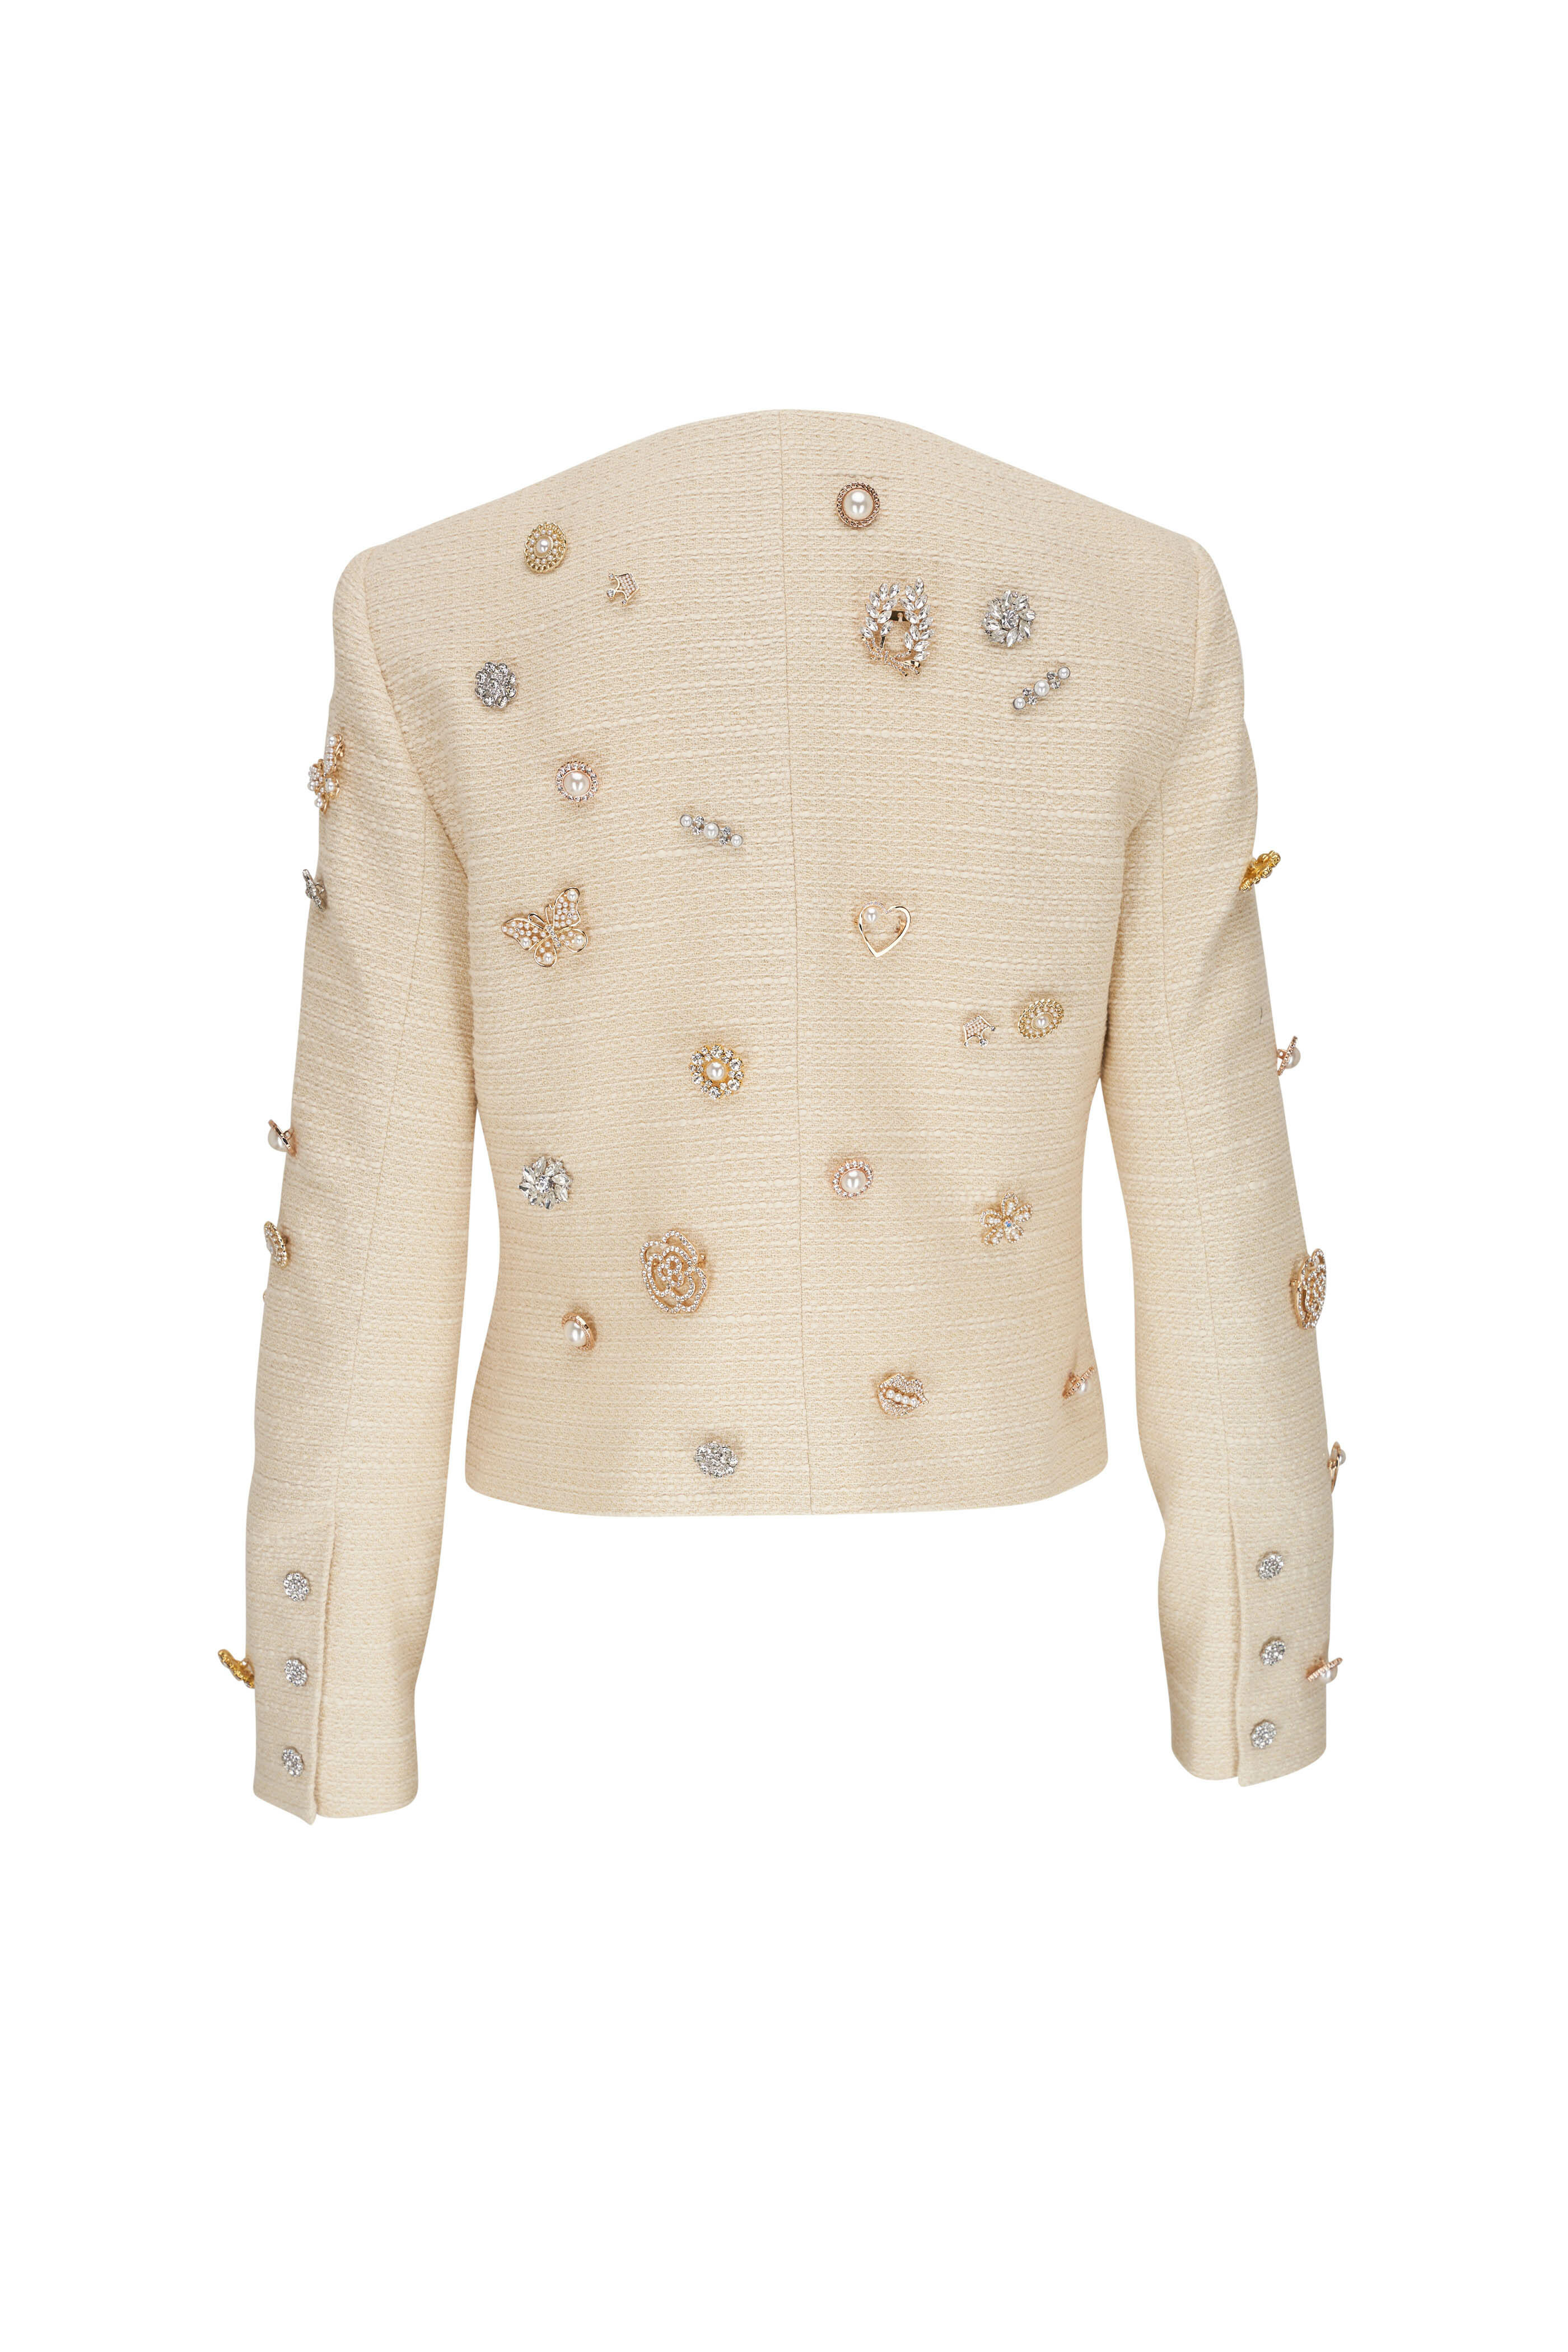 L'Agence - Tayla Broaches Ecru Tweed Jacket | Mitchell Stores